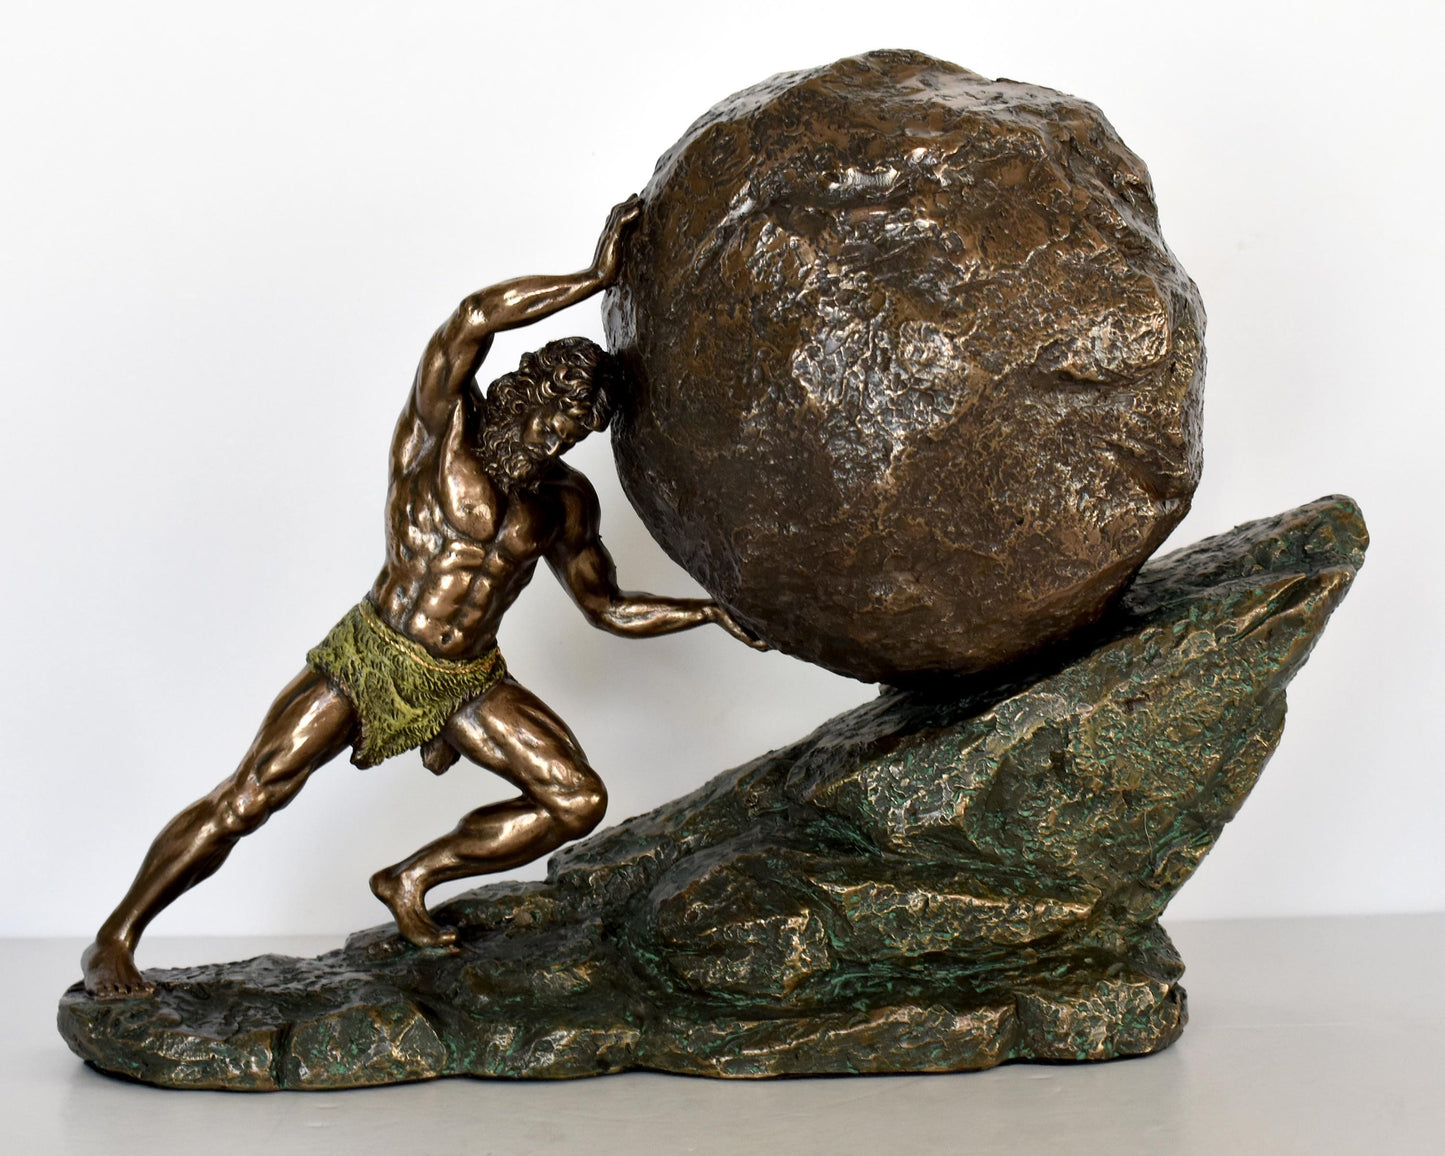 Sisyphus Sisyphos - king of Ephyra Corinth - Hades punished him to roll a boulder up a hill for eternity - Cold Cast Bronze Resin